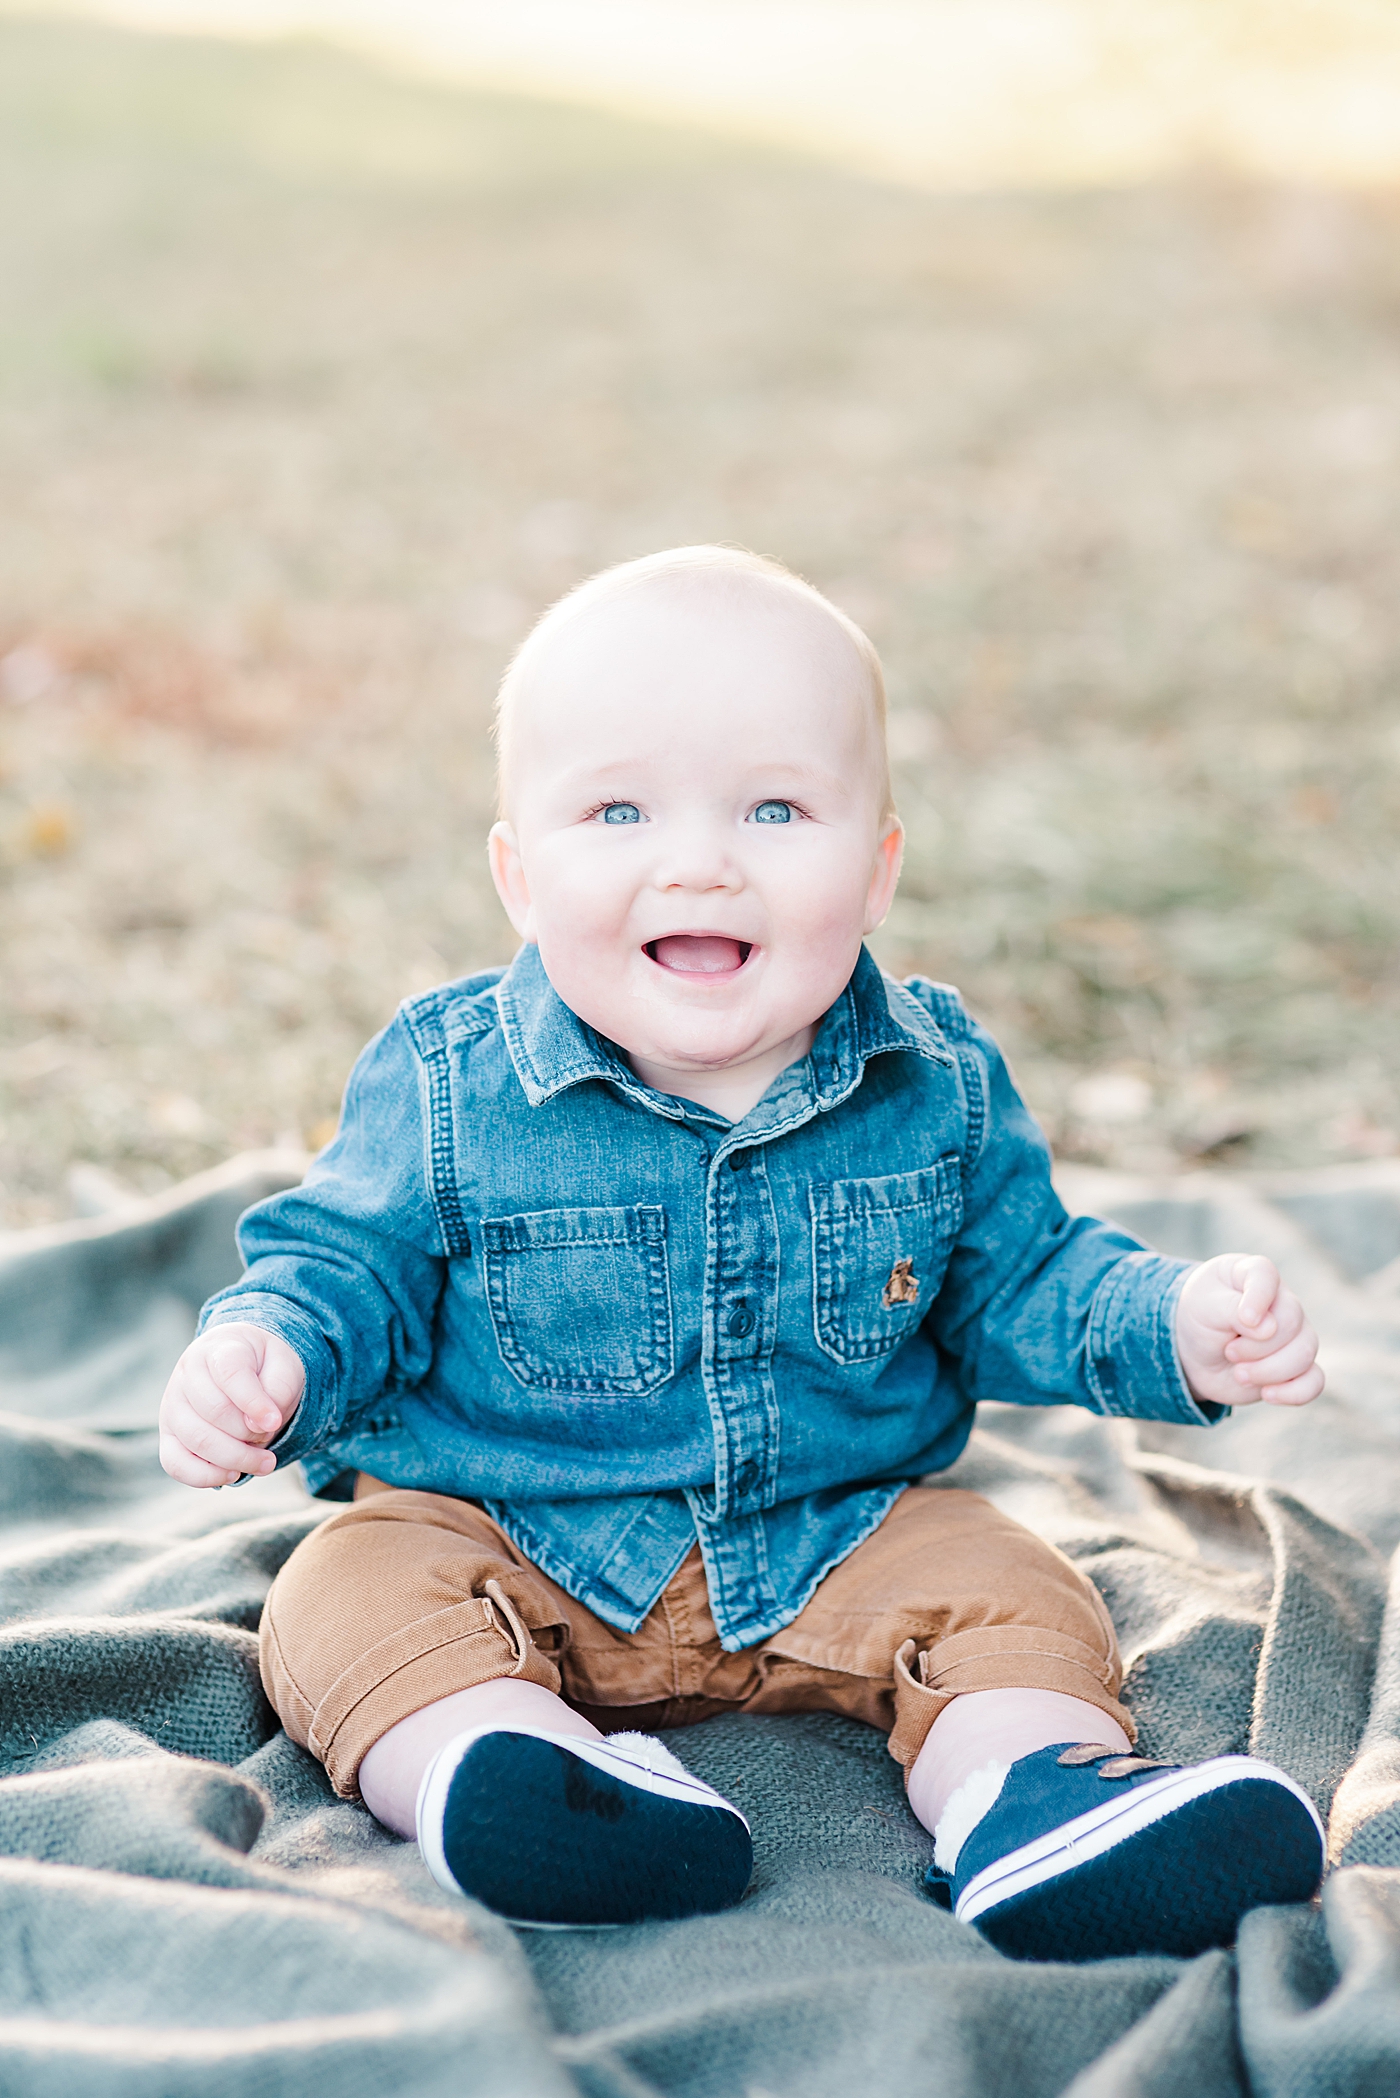 Baby boy with blue eyes sitting on a blanket in the grass | Photo by Anna Wisjo Photography